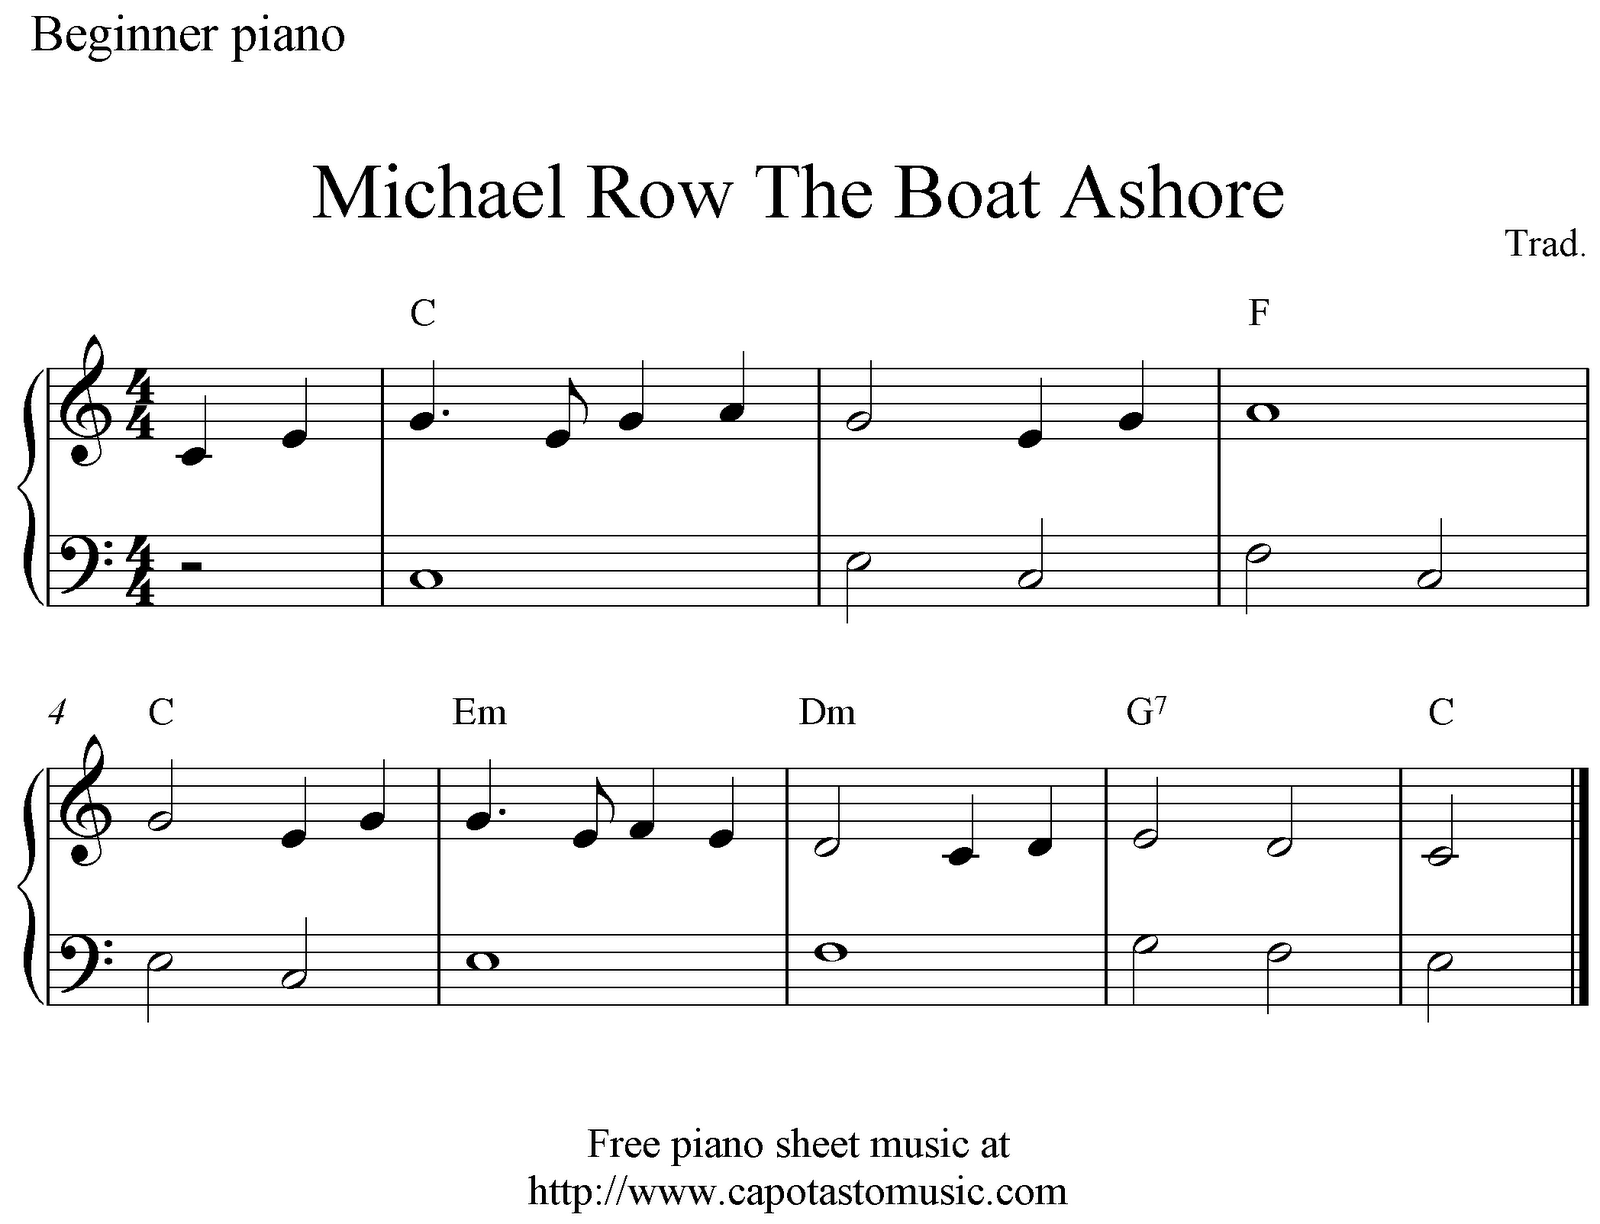 Free easy piano sheet music for beginners, Michael Row The Boat Ashore